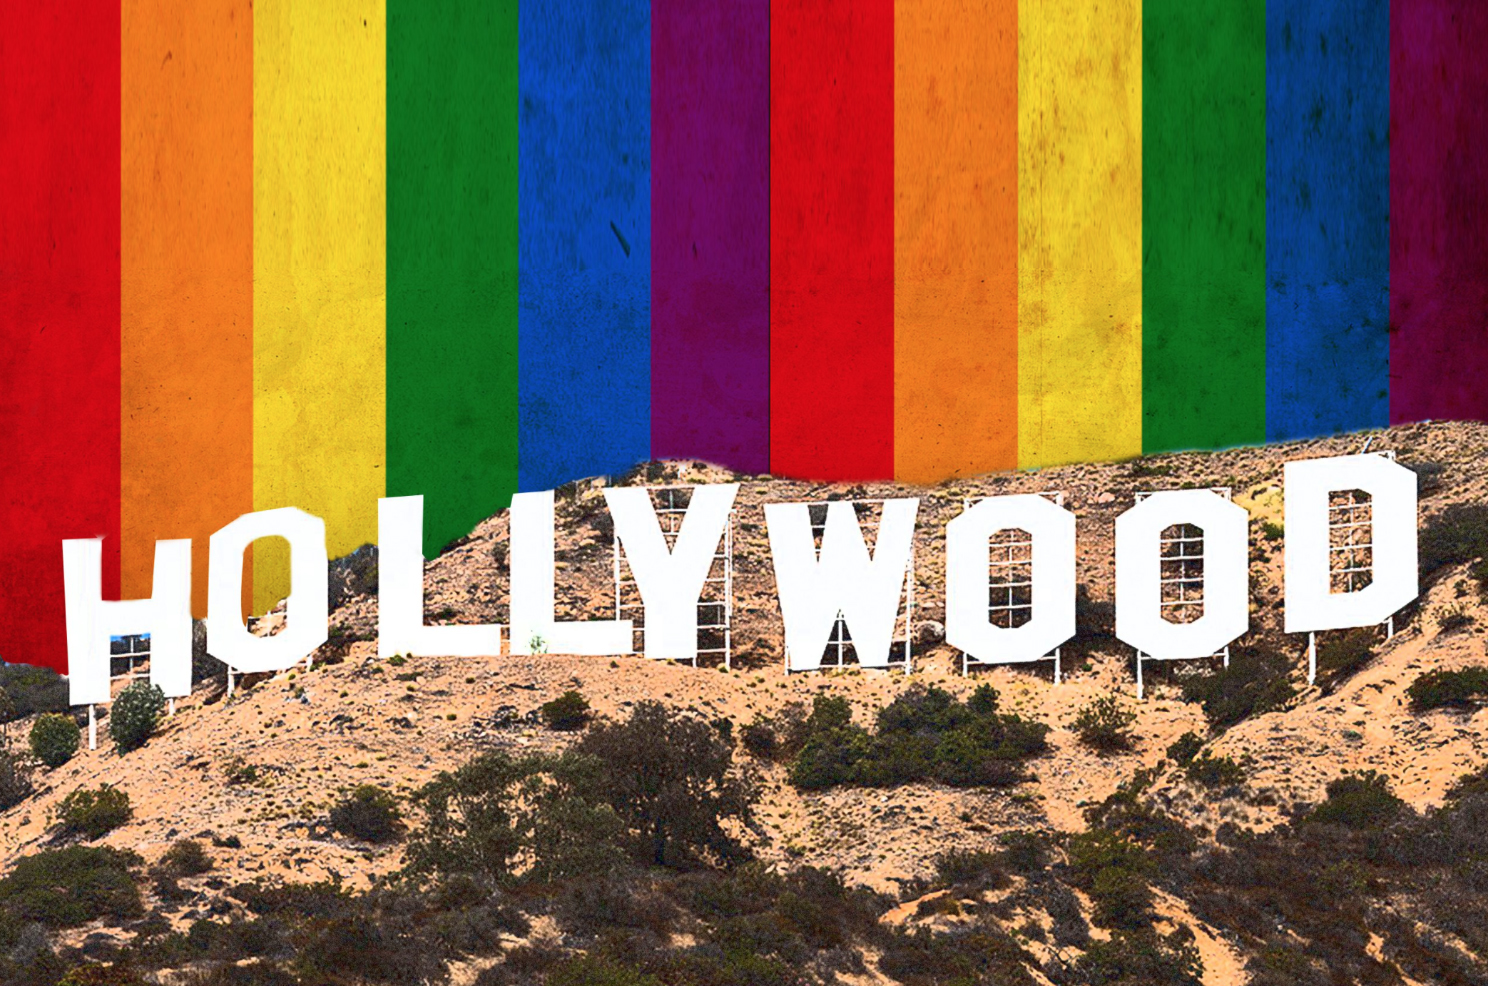 Lobby Lgbt di Hollywood chiede di assumere più dipendenti queer, gay e transgender 1